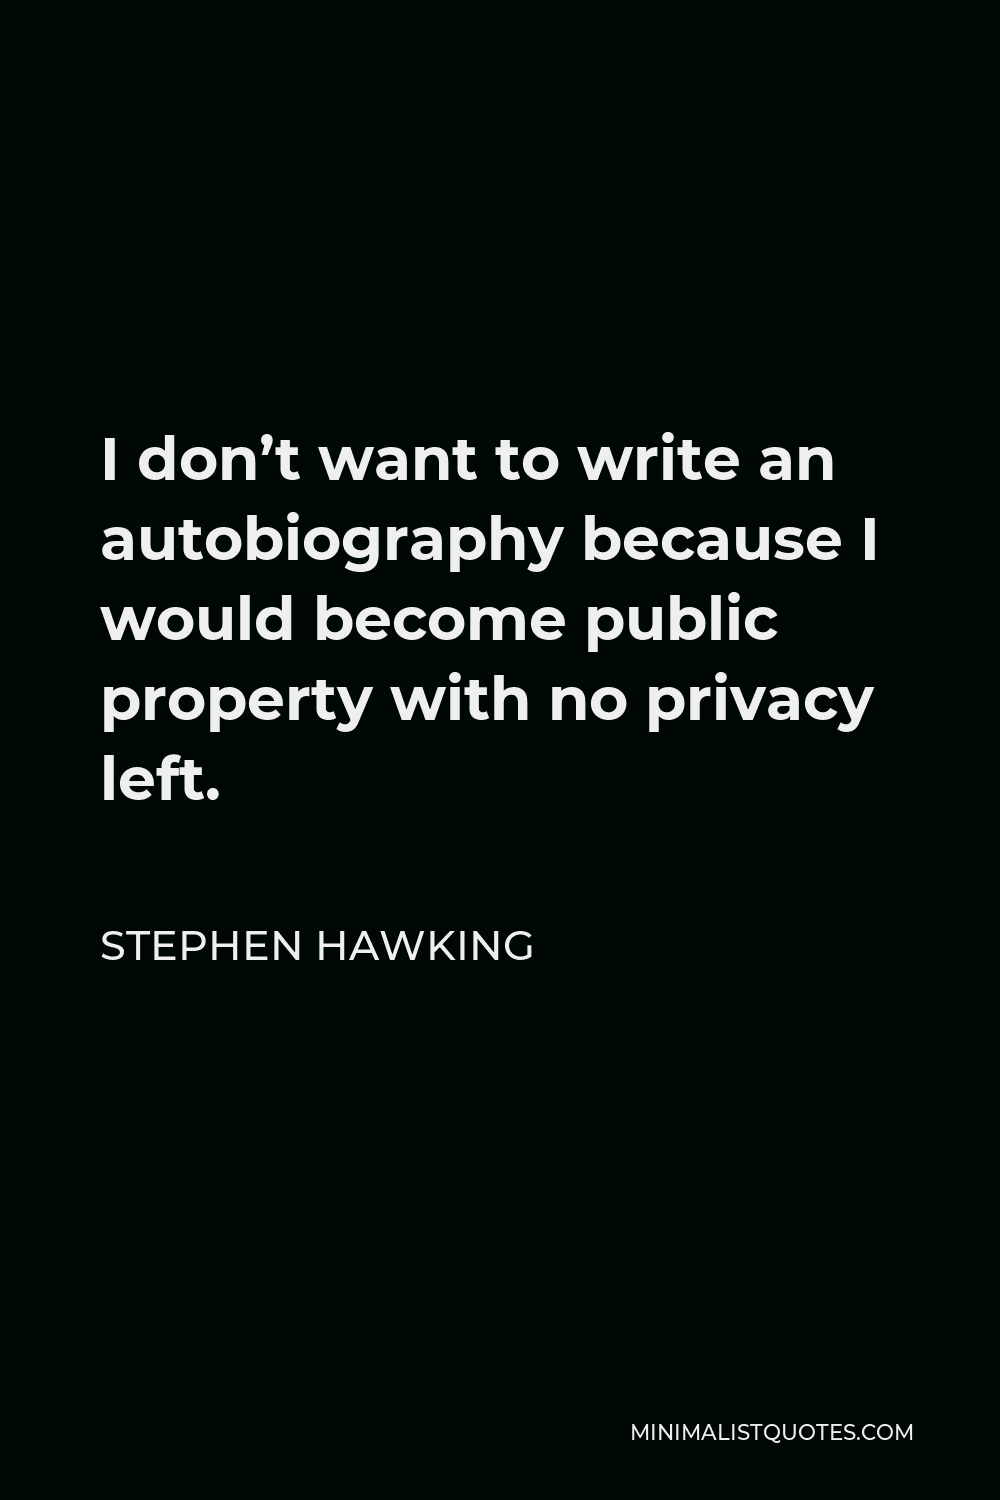 Stephen Hawking Quote - I don’t want to write an autobiography because I would become public property with no privacy left.